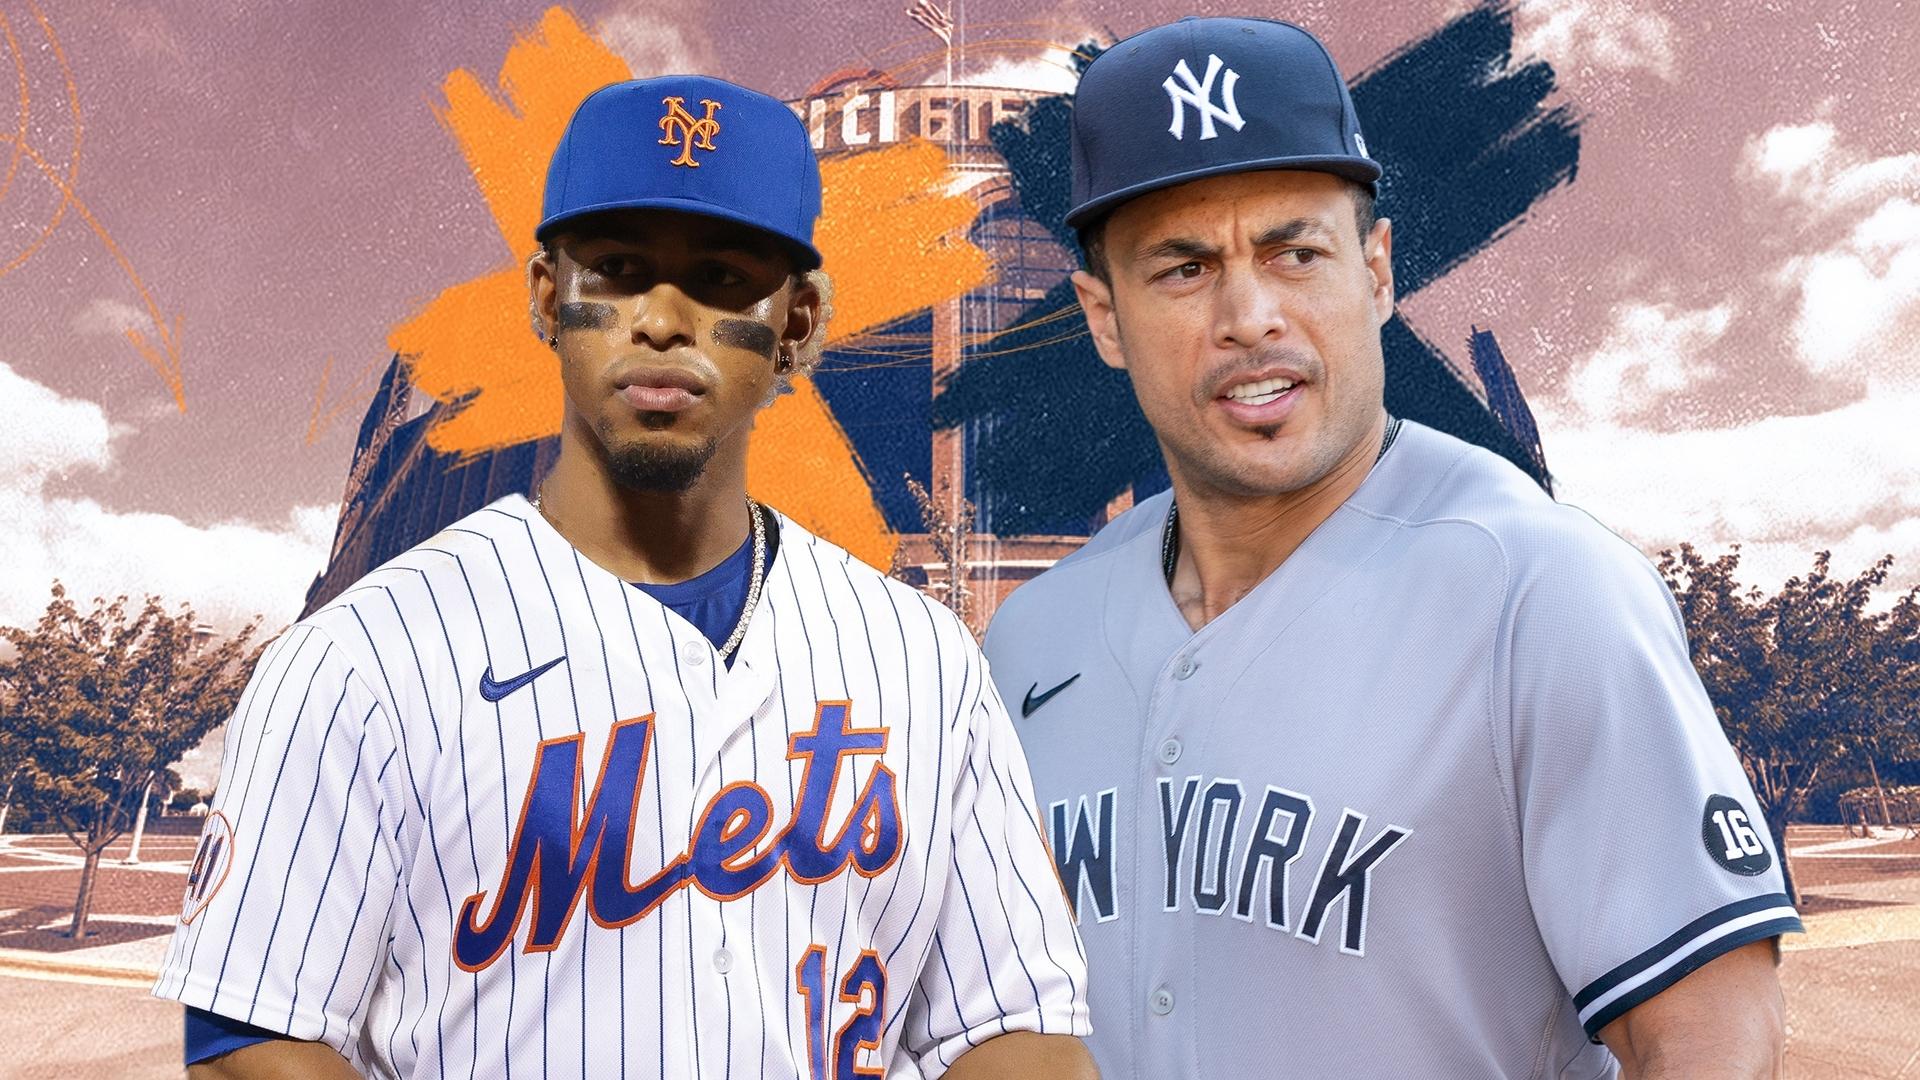 Francisco Lindor and Giancarlo Stanton / SNY Treated Image